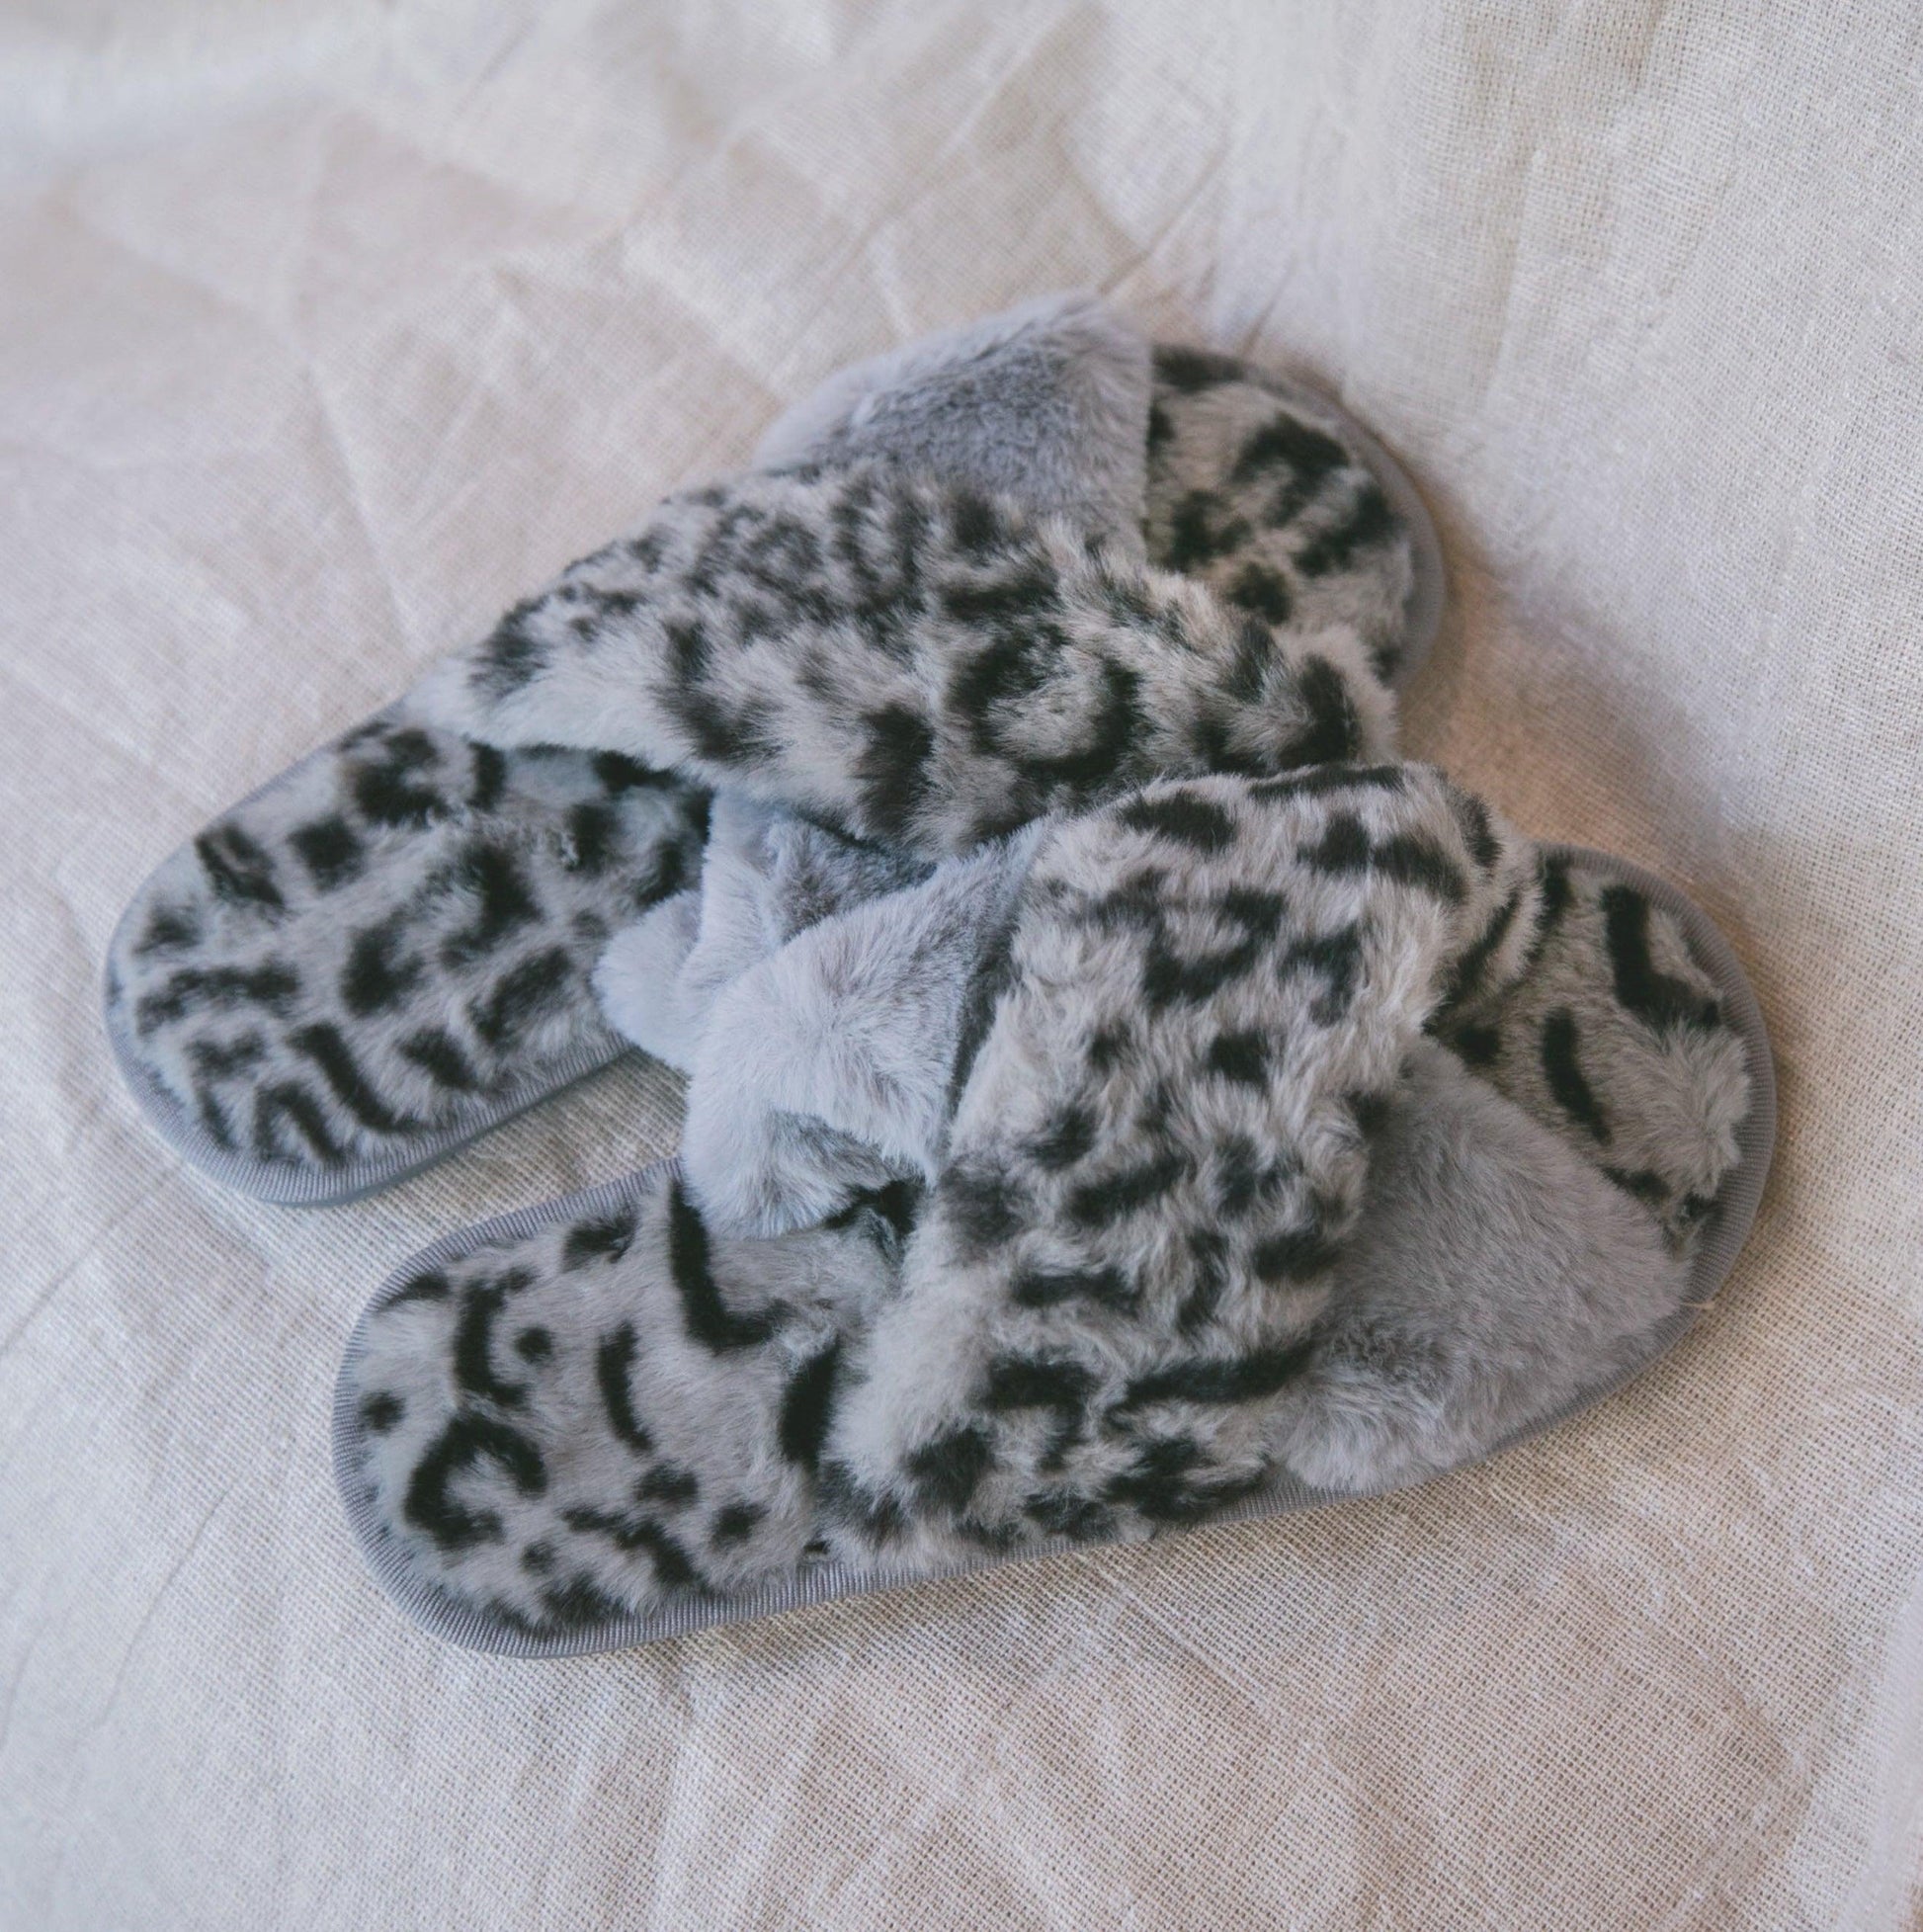 Noelle Leopard Print Slippers - Grey - Luna Charles | accessories, animal, comfort, fluffy, leopard, slippers | 